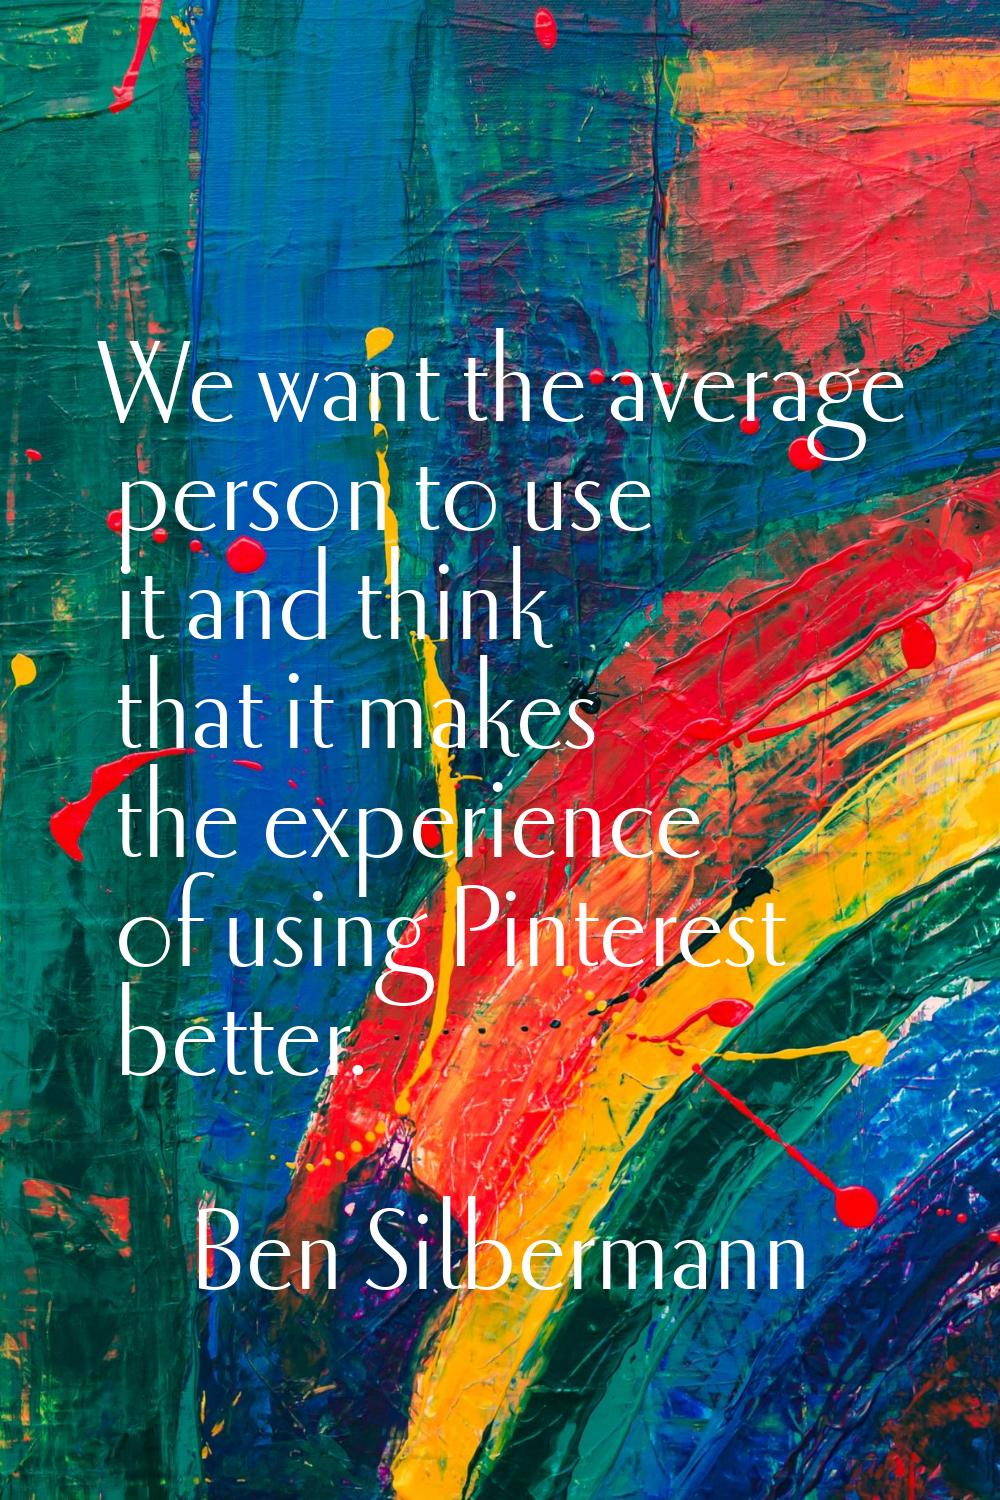 We want the average person to use it and think that it makes the experience of using Pinterest bett